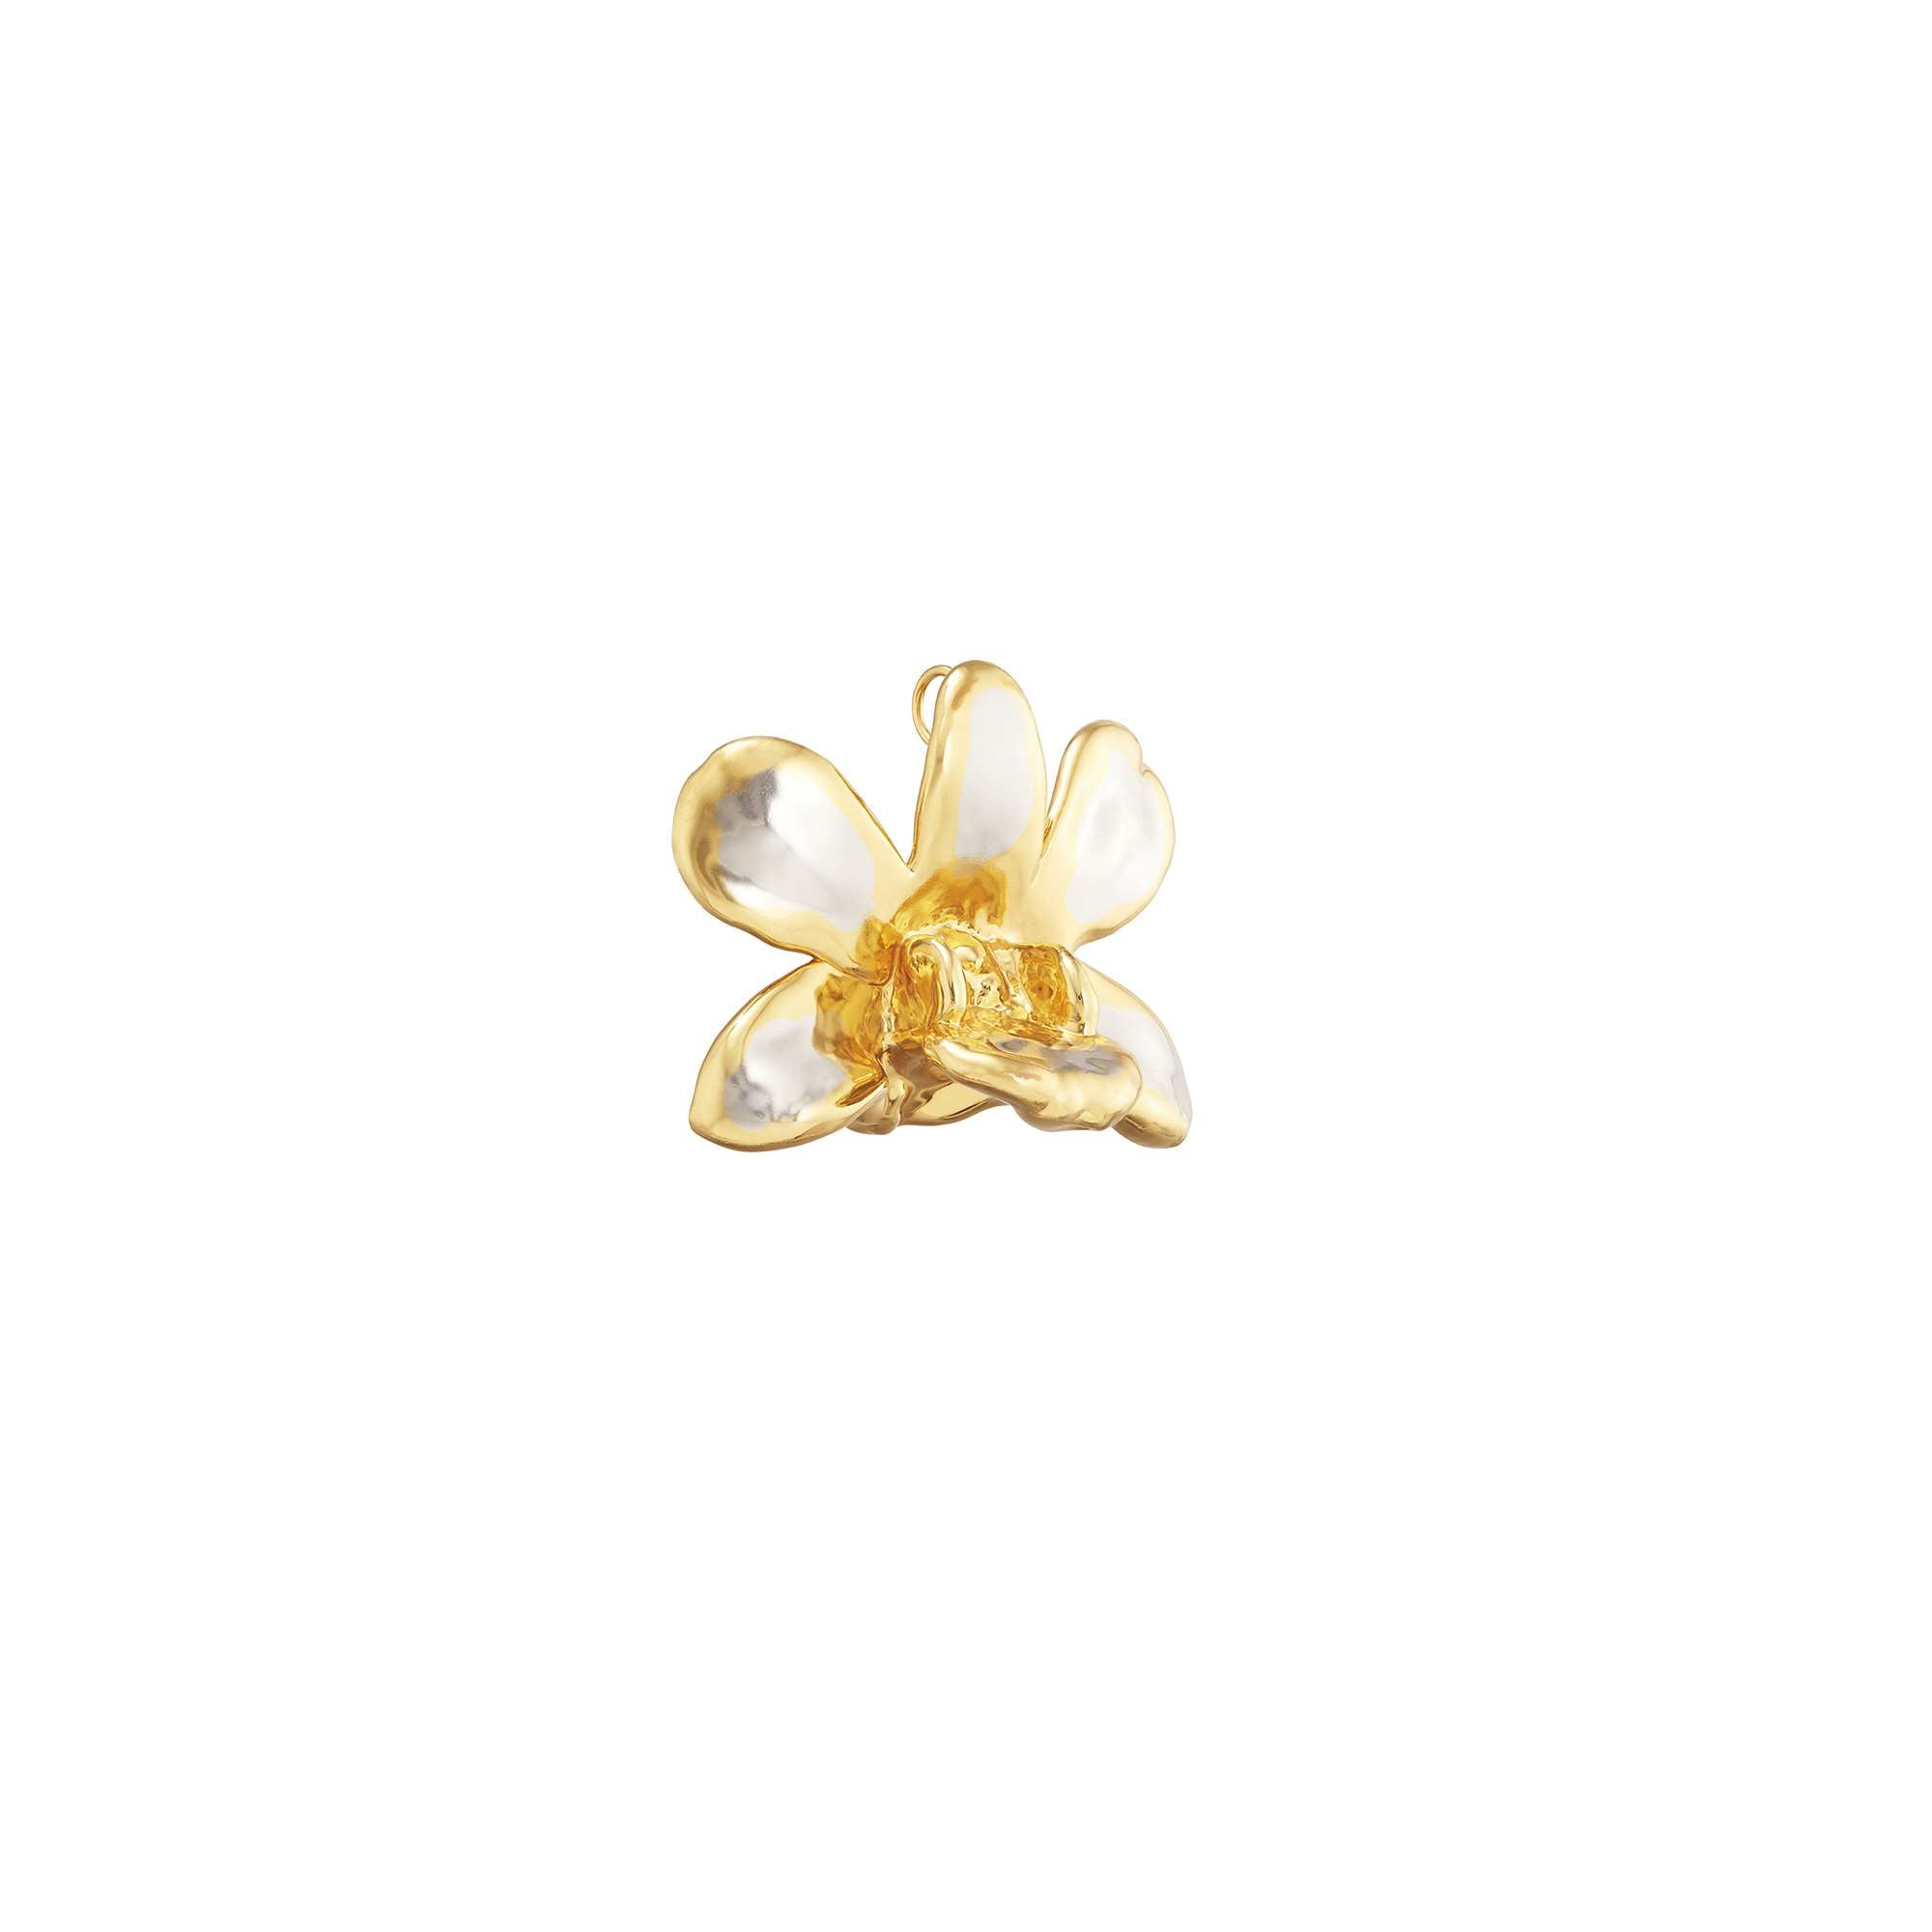 Dendrobium Thong Chai Orchid Brooch/Pendant (PG)